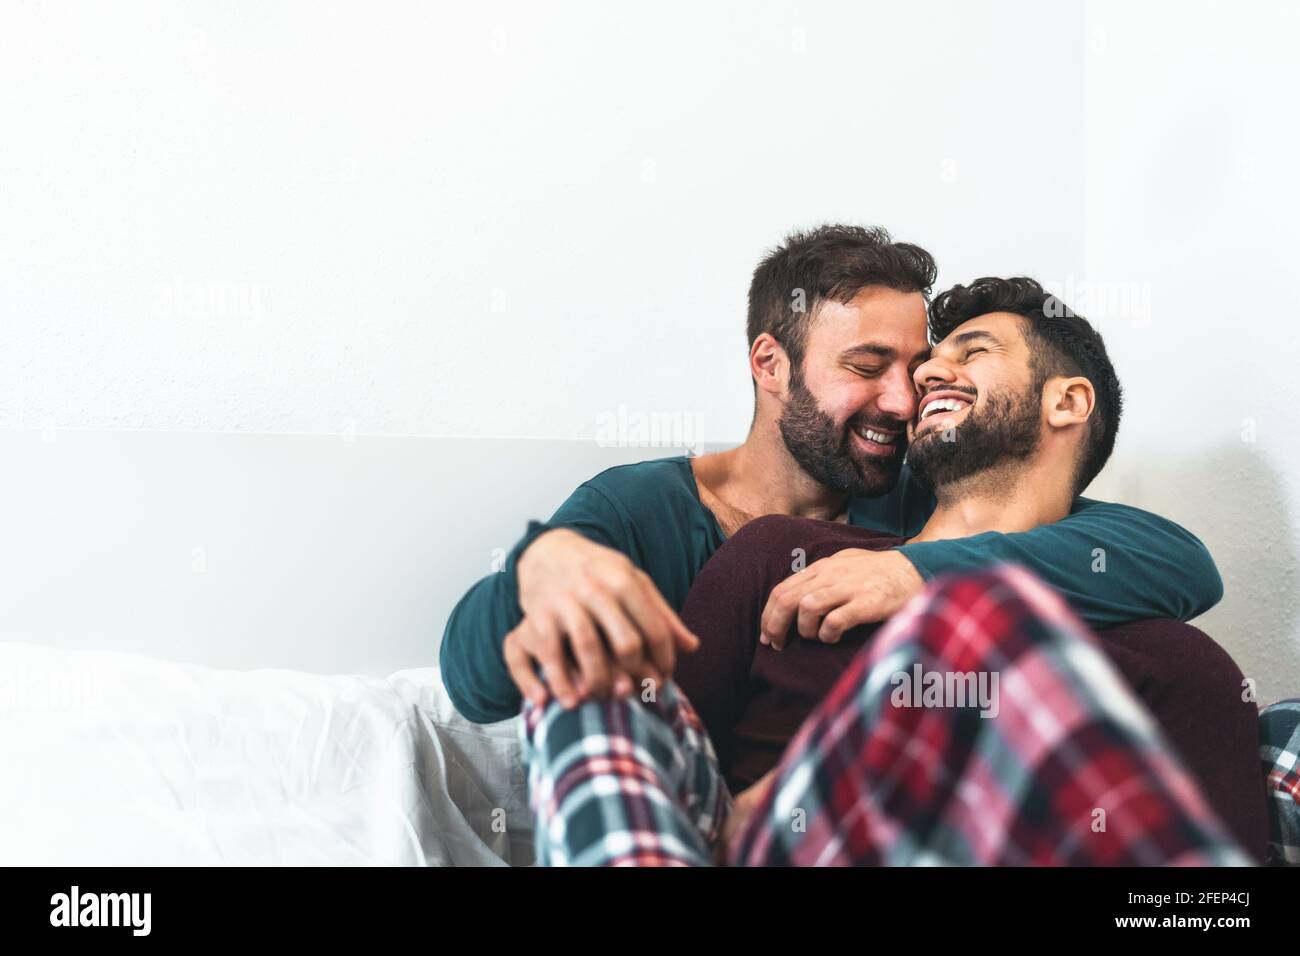 GAY DATING APPS FOR WINDOWS 10